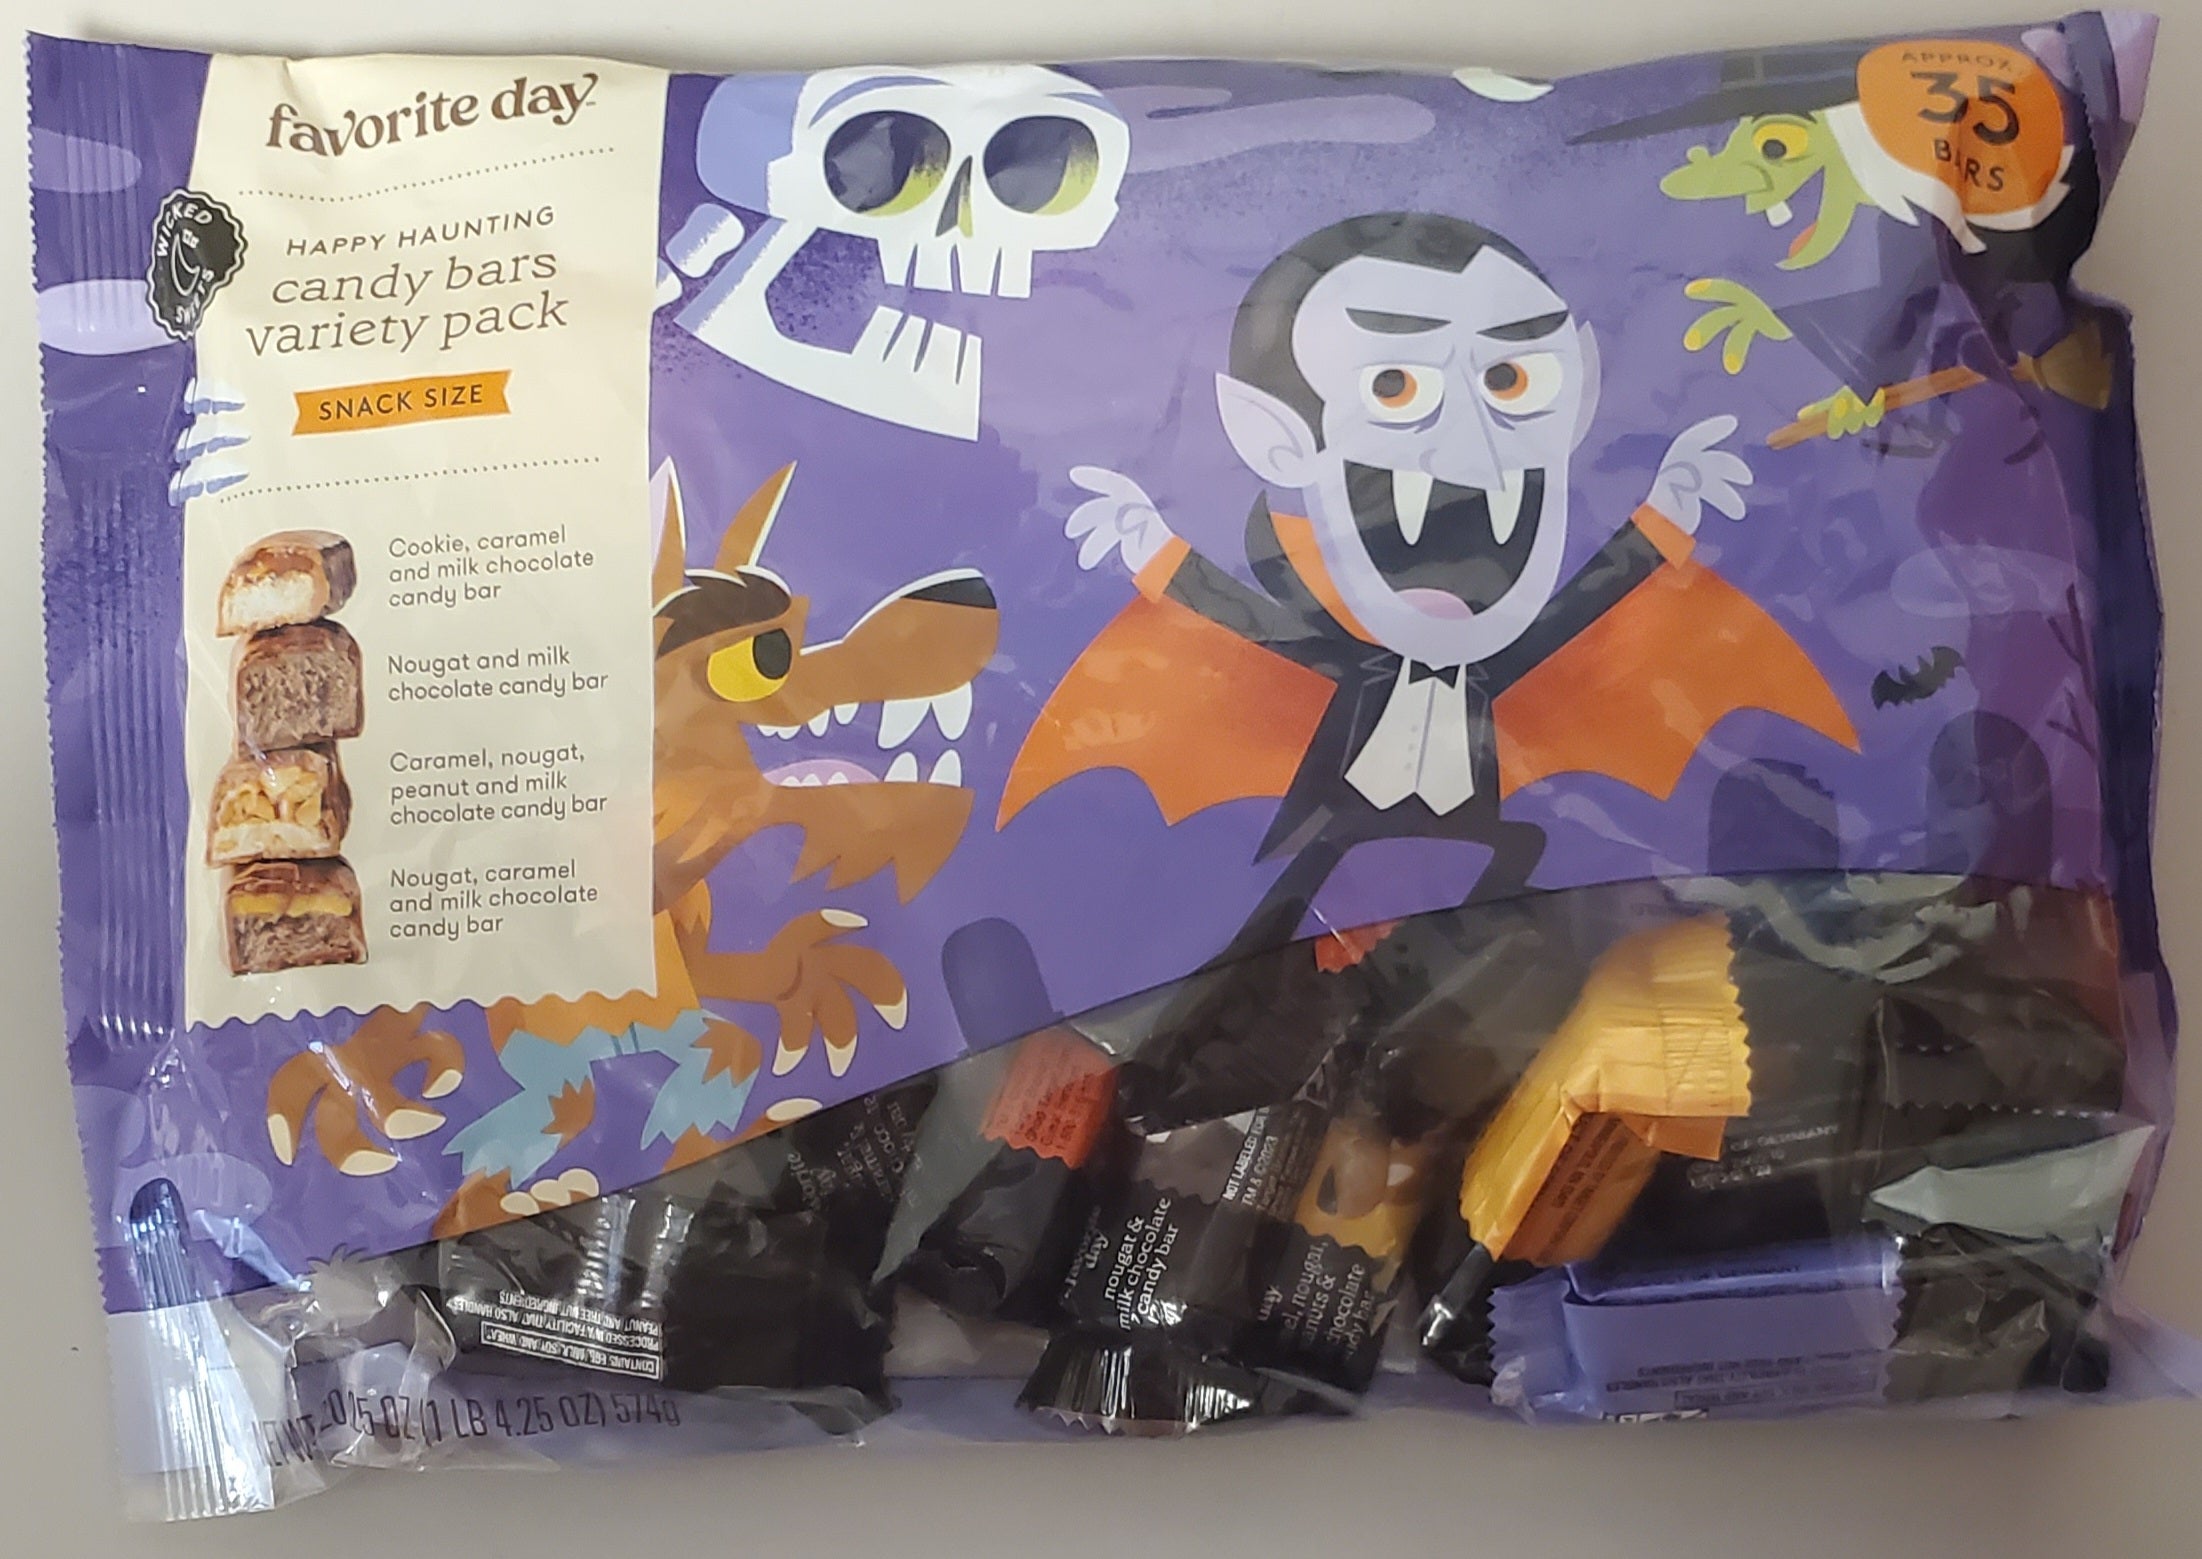 Favorite Day Happy Haunting Candy Bars Variety Pack